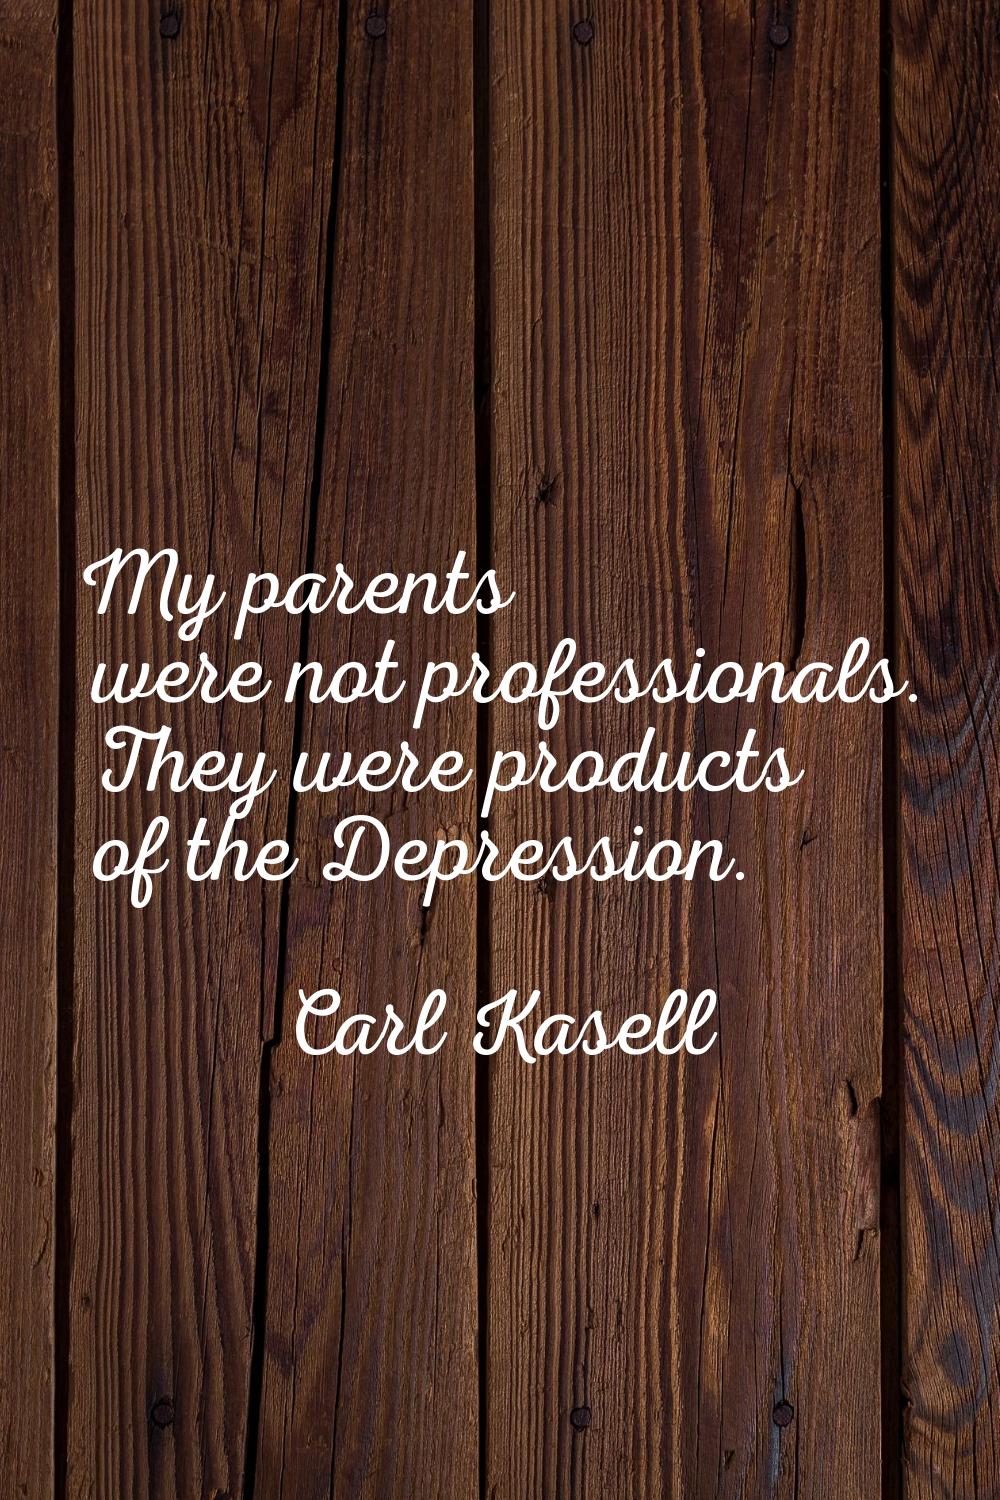 My parents were not professionals. They were products of the Depression.